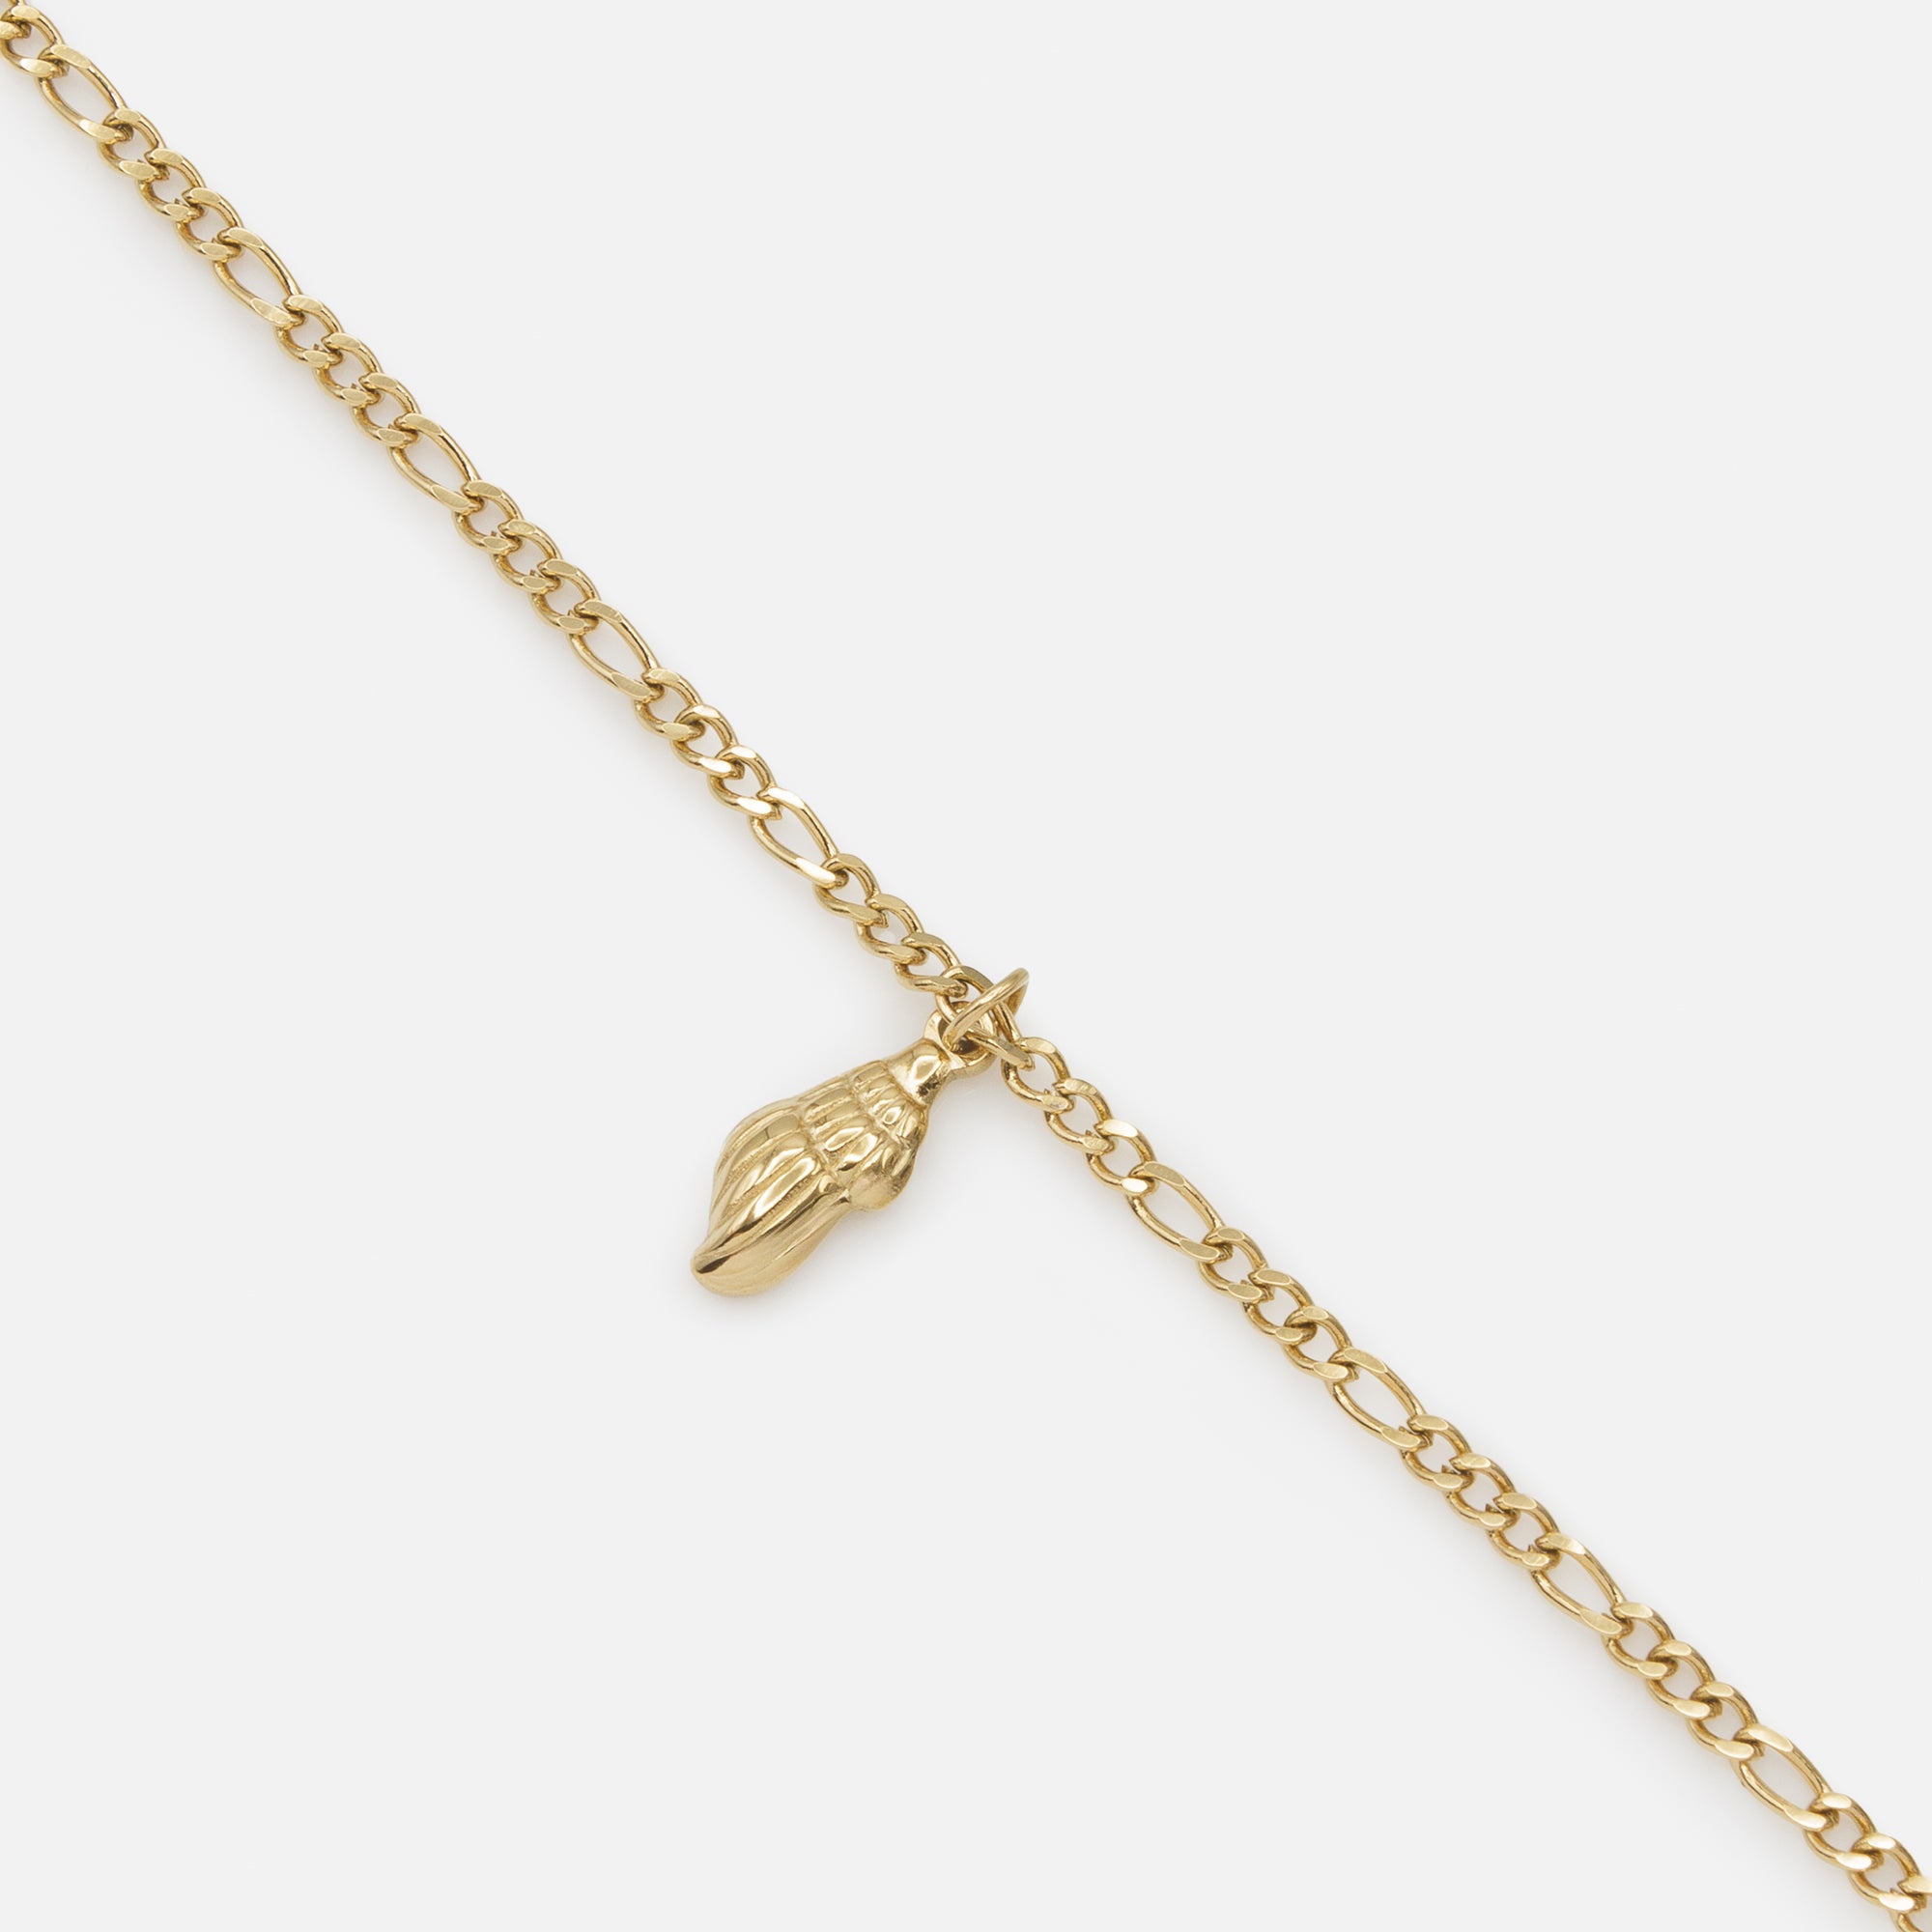 Gold figaro link bracelet with stainless steel shell charm